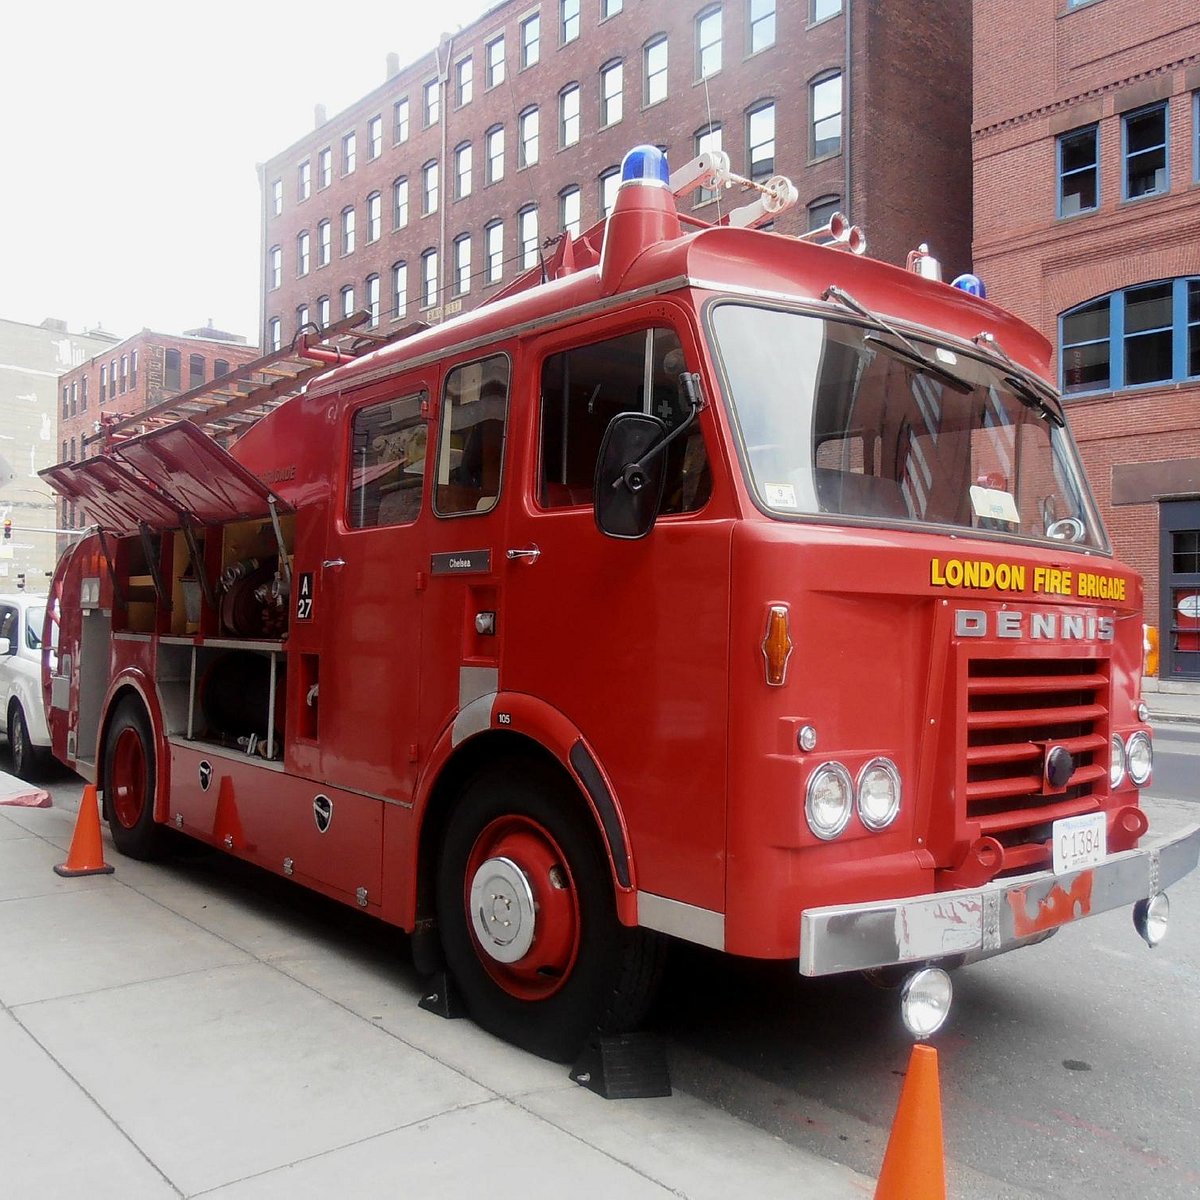 Grant Helps Boston Fire Dept. Combat Occupational Cancer